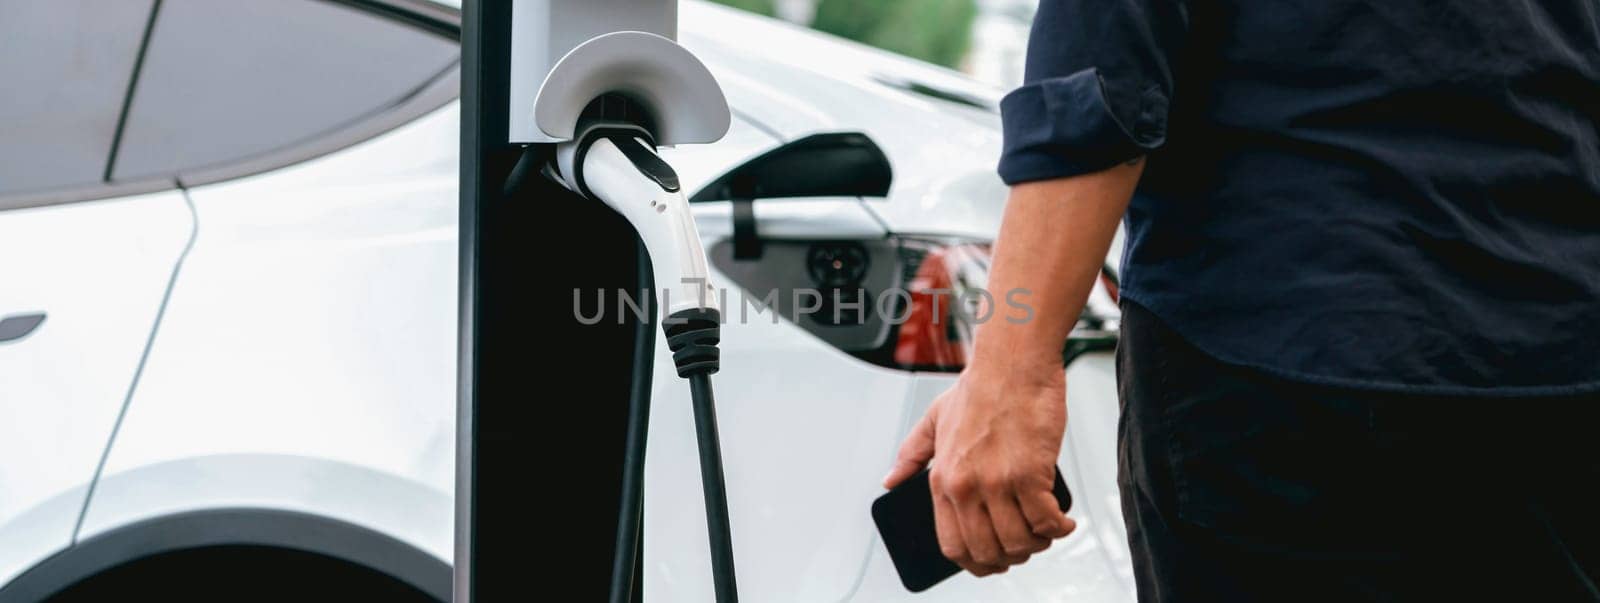 Man using smartphone to pay for electric car charging. Exalt by biancoblue